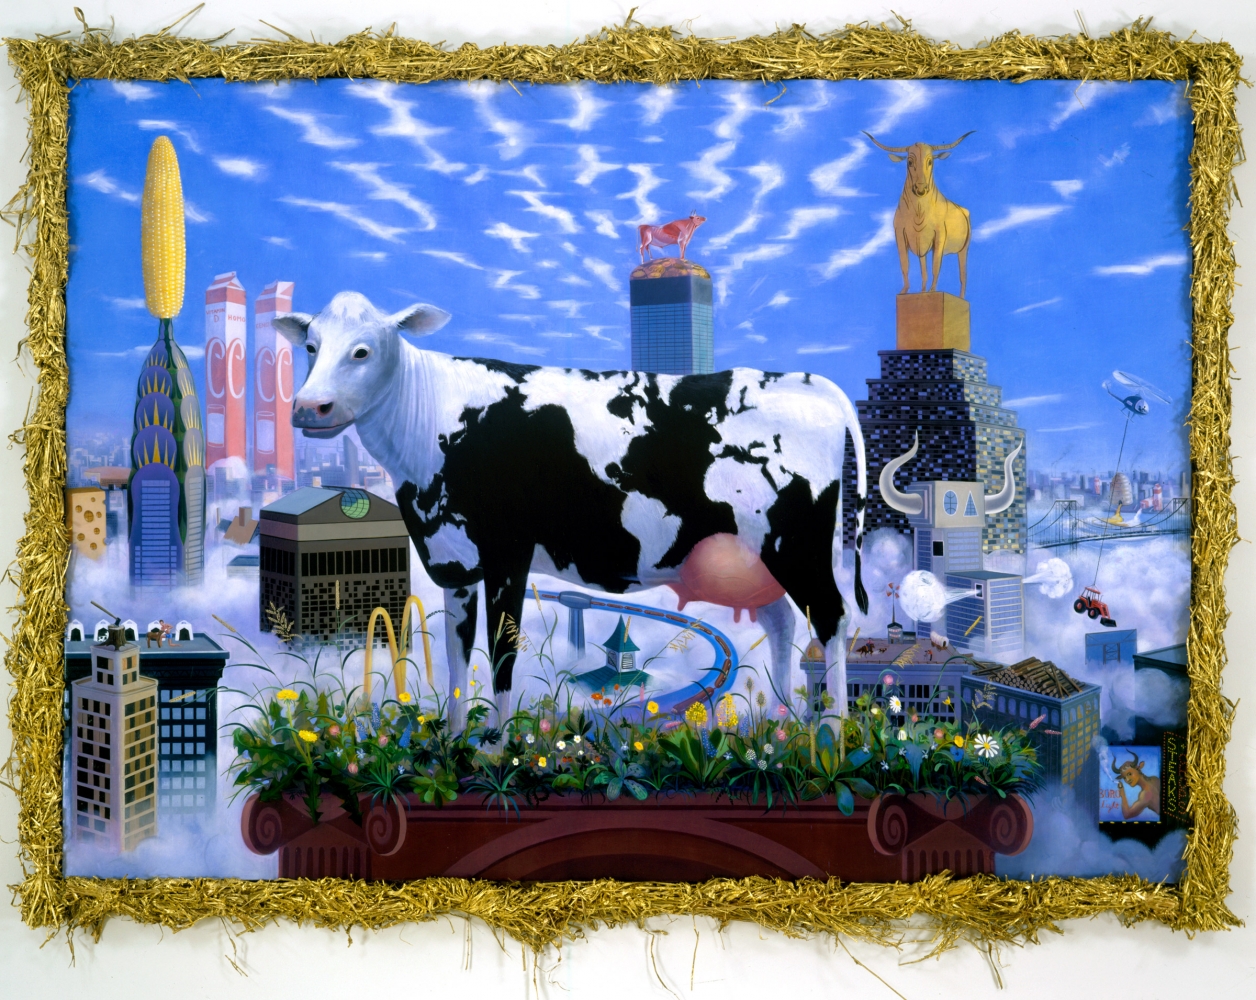 Frank Moore
Cow, 1996
oil and gold leaf on canvas over featherboard panel with gilt hay on aluminum frame
69 x 96 1/4 inches (175,3 x 244,5 cm) canvas
77 x 104 1/4 inches (195,6 x 264,8 cm,) overall
SW 96482
Private Collection